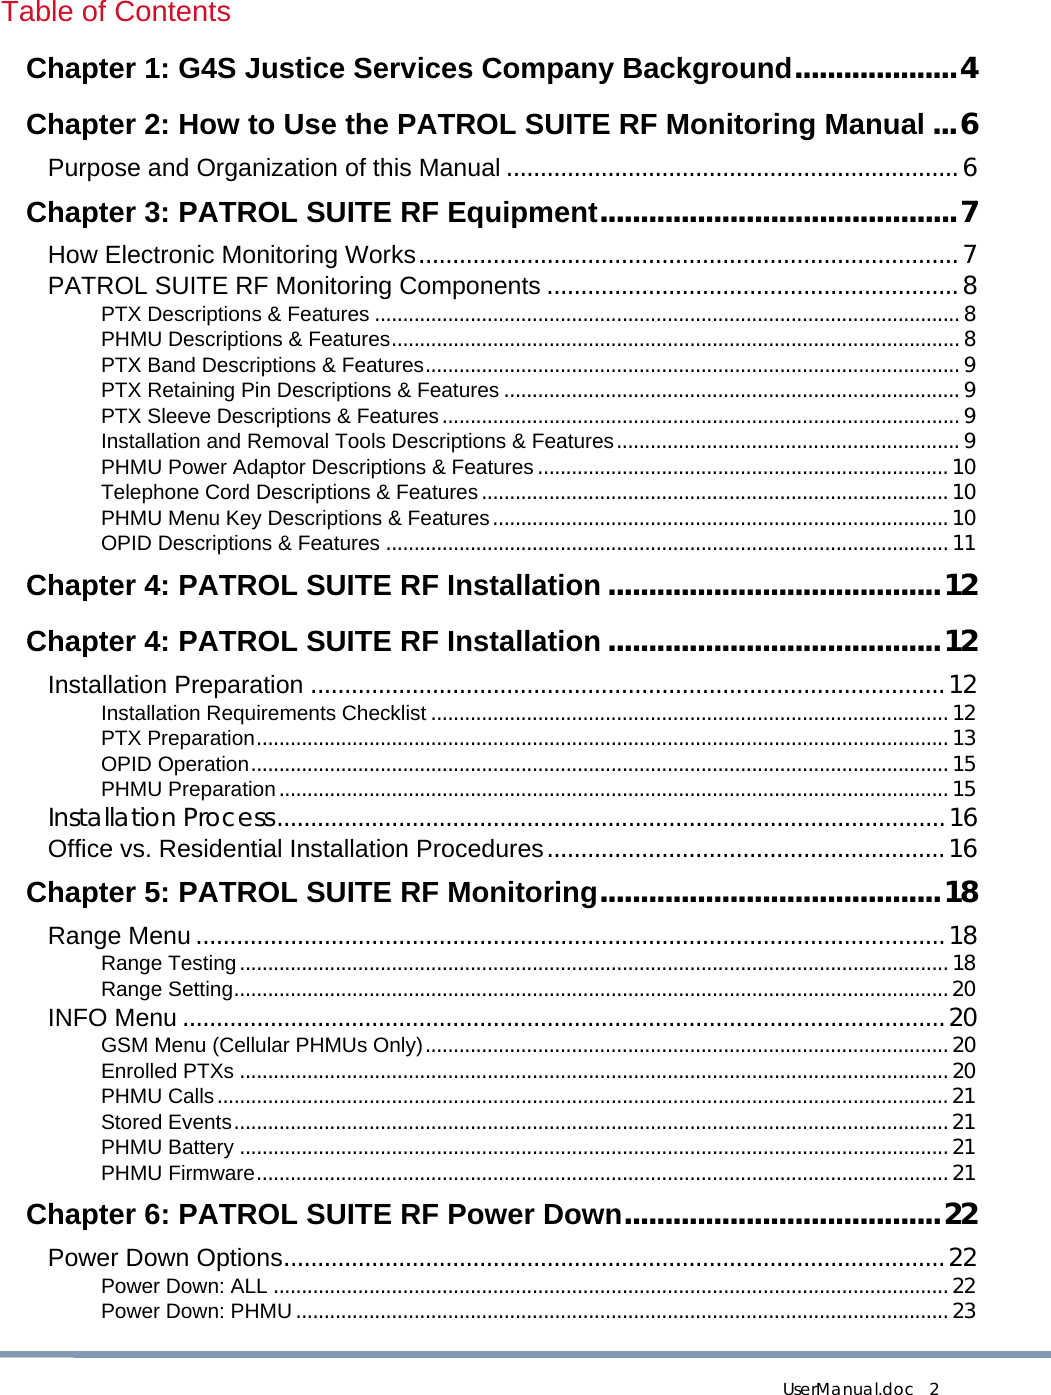  UserManual.doc   2 Table of Contents Chapter 1: G4S Justice Services Company Background....................4 Chapter 2: How to Use the PATROL SUITE RF Monitoring Manual ...6 Purpose and Organization of this Manual ...................................................................6 Chapter 3: PATROL SUITE RF Equipment............................................7 How Electronic Monitoring Works................................................................................7 PATROL SUITE RF Monitoring Components .............................................................8 PTX Descriptions &amp; Features ........................................................................................................ 8 PHMU Descriptions &amp; Features..................................................................................................... 8 PTX Band Descriptions &amp; Features............................................................................................... 9 PTX Retaining Pin Descriptions &amp; Features ................................................................................. 9 PTX Sleeve Descriptions &amp; Features............................................................................................ 9 Installation and Removal Tools Descriptions &amp; Features............................................................. 9 PHMU Power Adaptor Descriptions &amp; Features.........................................................................10 Telephone Cord Descriptions &amp; Features...................................................................................10 PHMU Menu Key Descriptions &amp; Features.................................................................................10 OPID Descriptions &amp; Features ....................................................................................................11 Chapter 4: PATROL SUITE RF Installation .........................................12 Chapter 4: PATROL SUITE RF Installation .........................................12 Installation Preparation ..............................................................................................12 Installation Requirements Checklist ............................................................................................12 PTX Preparation...........................................................................................................................13 OPID Operation............................................................................................................................15 PHMU Preparation.......................................................................................................................15 Installation Process...................................................................................................16 Office vs. Residential Installation Procedures...........................................................16 Chapter 5: PATROL SUITE RF Monitoring..........................................18 Range Menu ...............................................................................................................18 Range Testing..............................................................................................................................18 Range Setting...............................................................................................................................20 INFO Menu .................................................................................................................20 GSM Menu (Cellular PHMUs Only).............................................................................................20 Enrolled PTXs ..............................................................................................................................20 PHMU Calls..................................................................................................................................21 Stored Events...............................................................................................................................21 PHMU Battery ..............................................................................................................................21 PHMU Firmware...........................................................................................................................21 Chapter 6: PATROL SUITE RF Power Down.......................................22 Power Down Options..................................................................................................22 Power Down: ALL ........................................................................................................................22 Power Down: PHMU....................................................................................................................23 